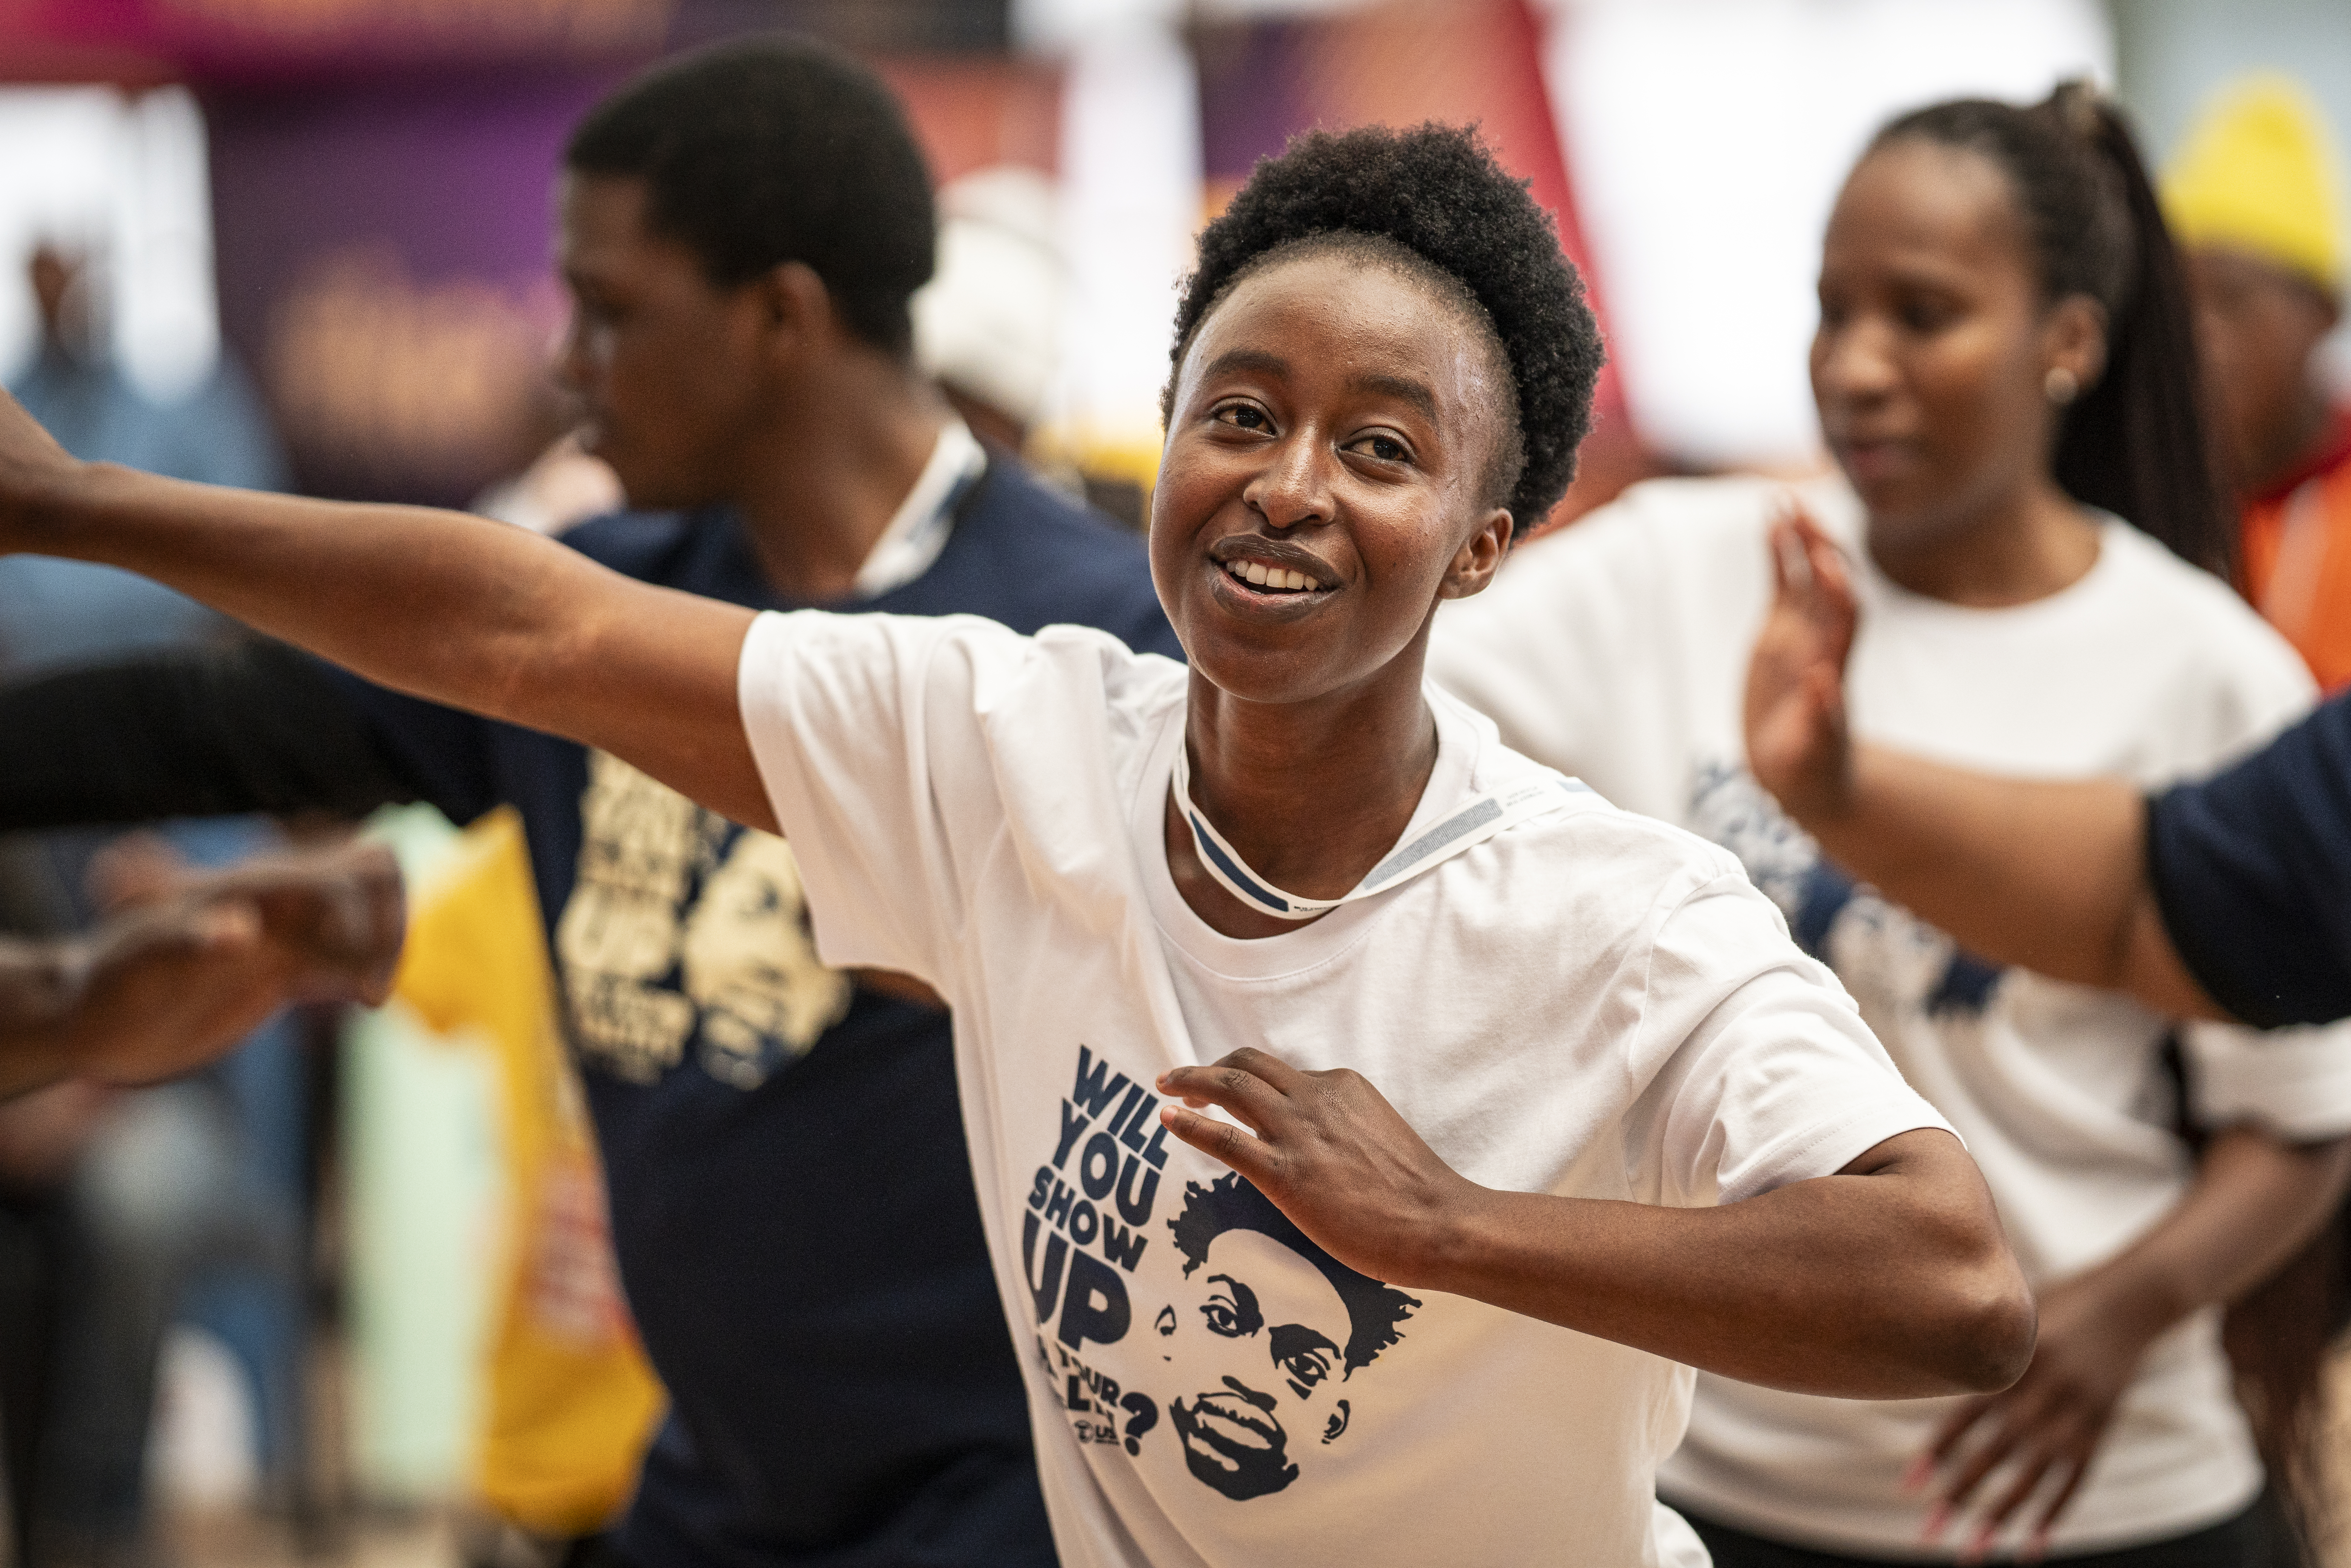 Youth dancing at a health and wellness event.